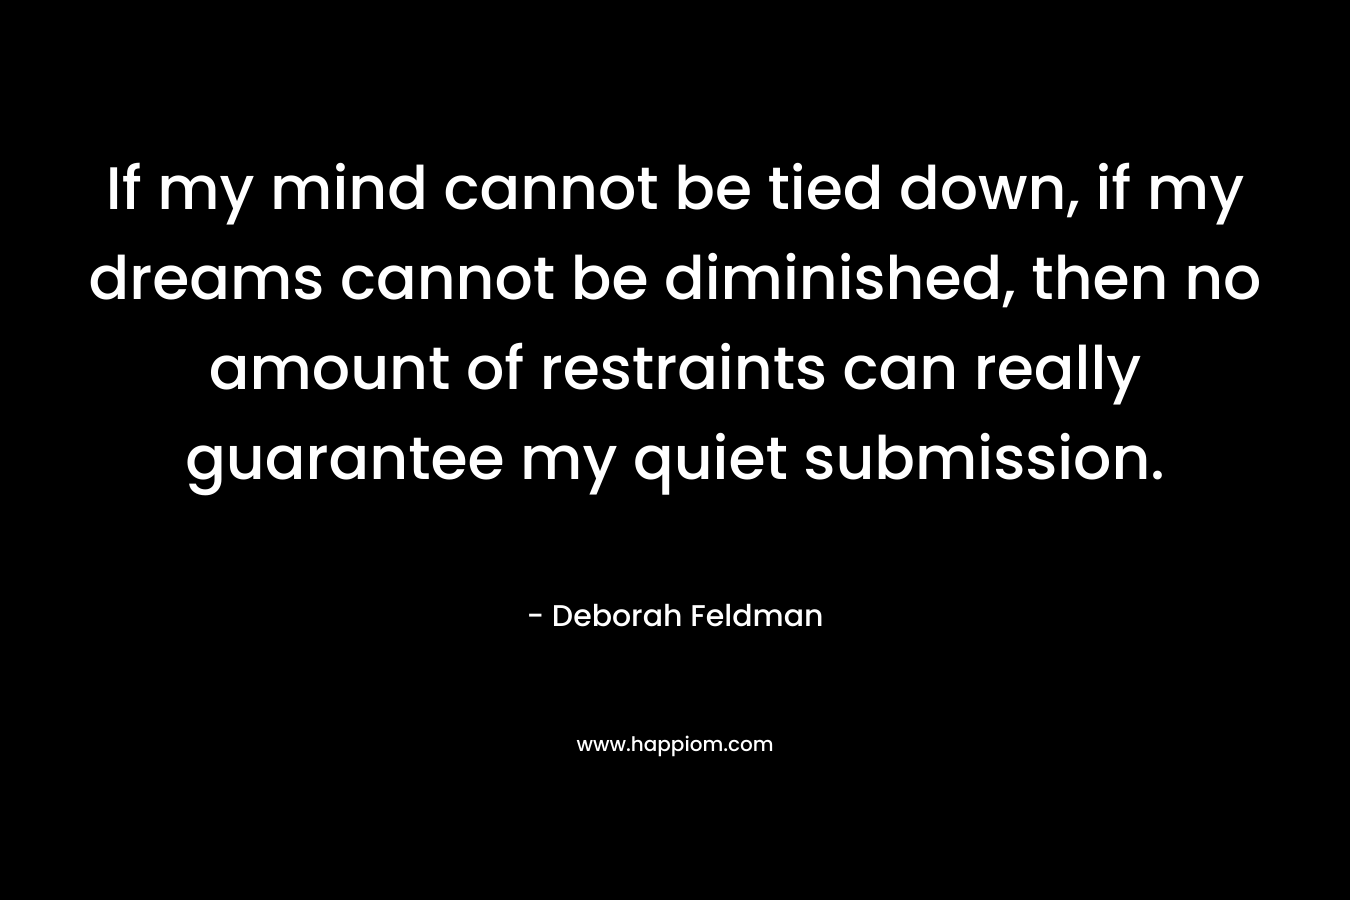 If my mind cannot be tied down, if my dreams cannot be diminished, then no amount of restraints can really guarantee my quiet submission. – Deborah Feldman